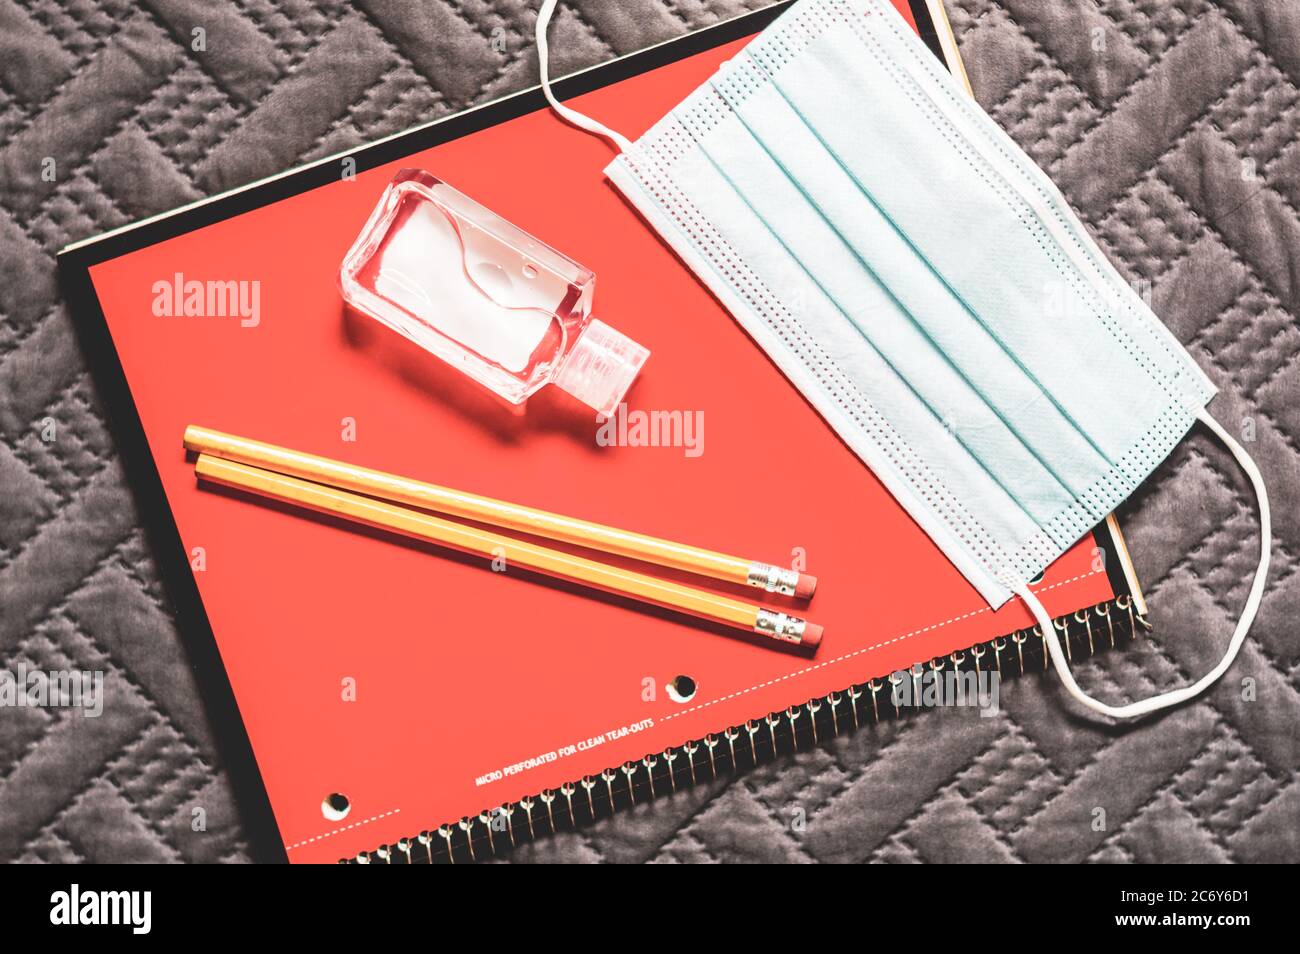 Essential school supplies for the new normal include face mask and hand sanitizer Stock Photo